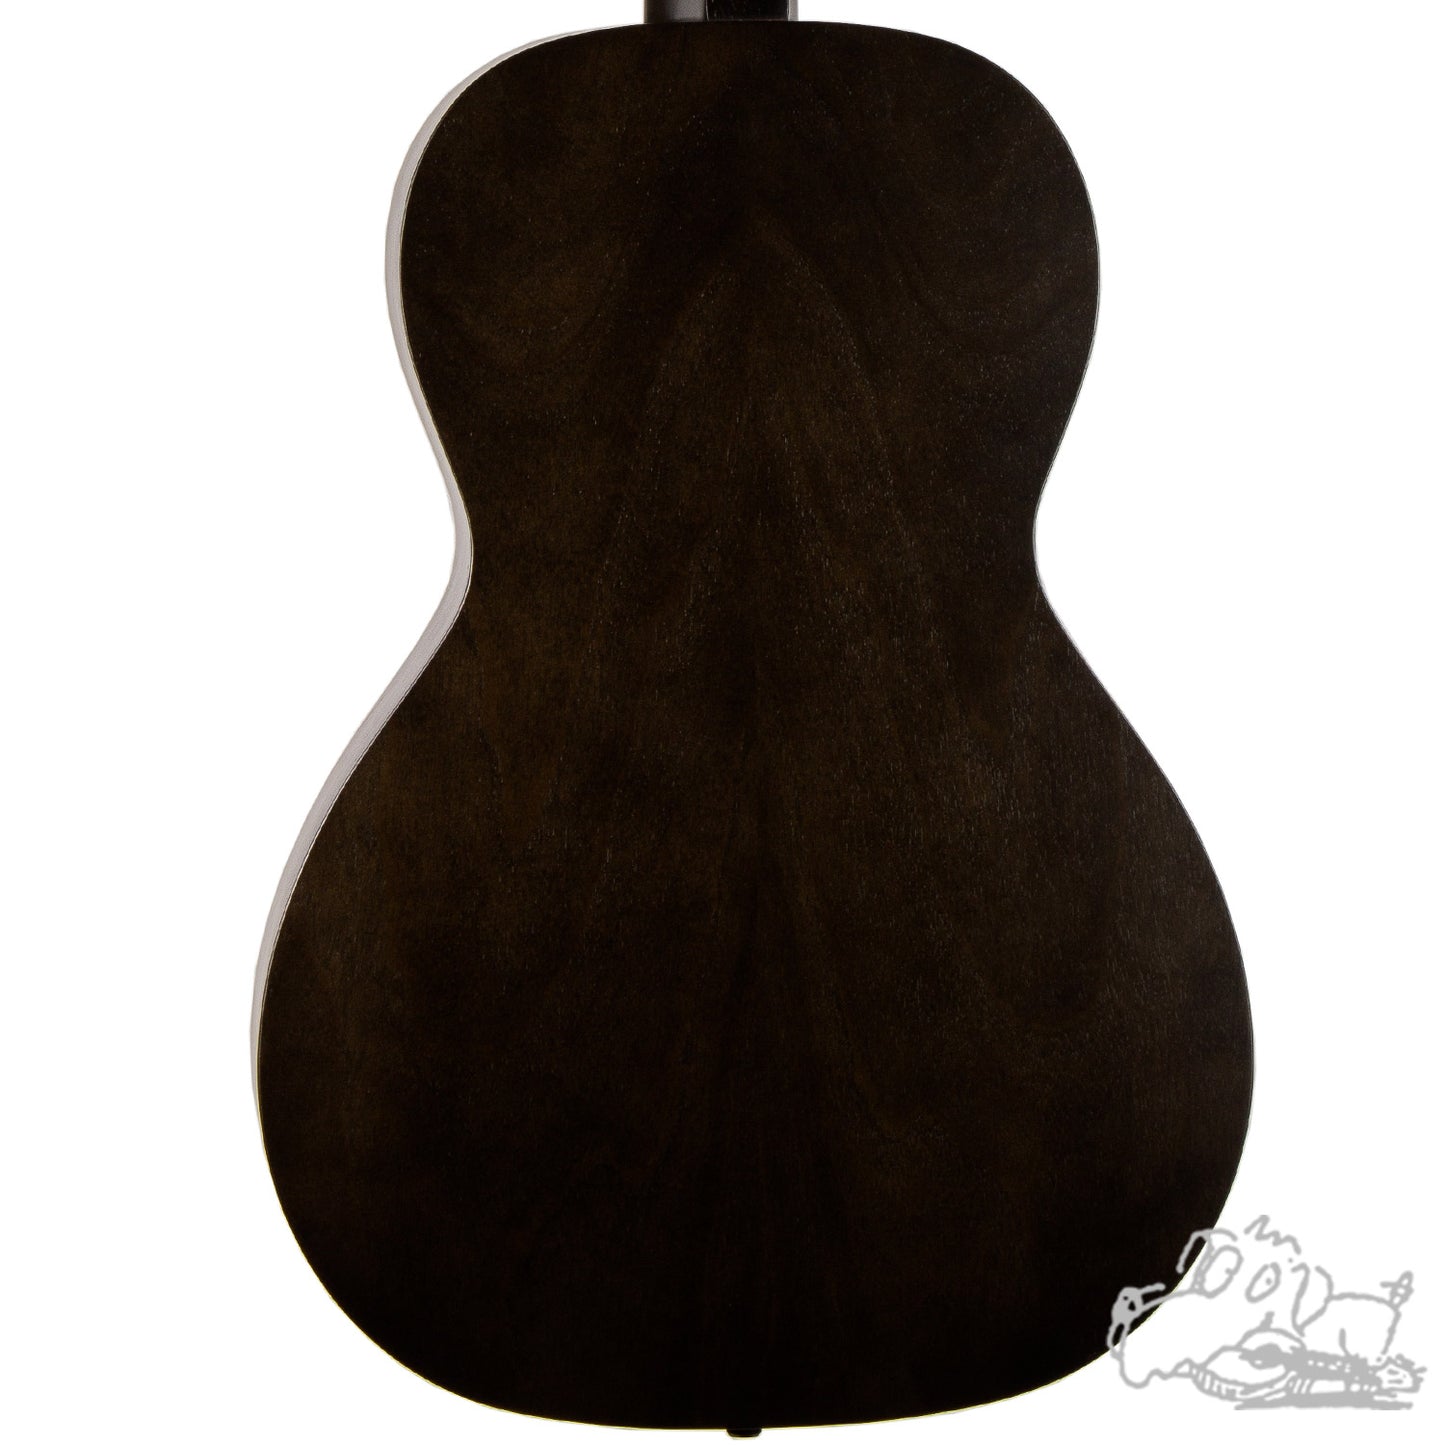 Art & Lutherie Roadhouse Faded Black w/ Bag